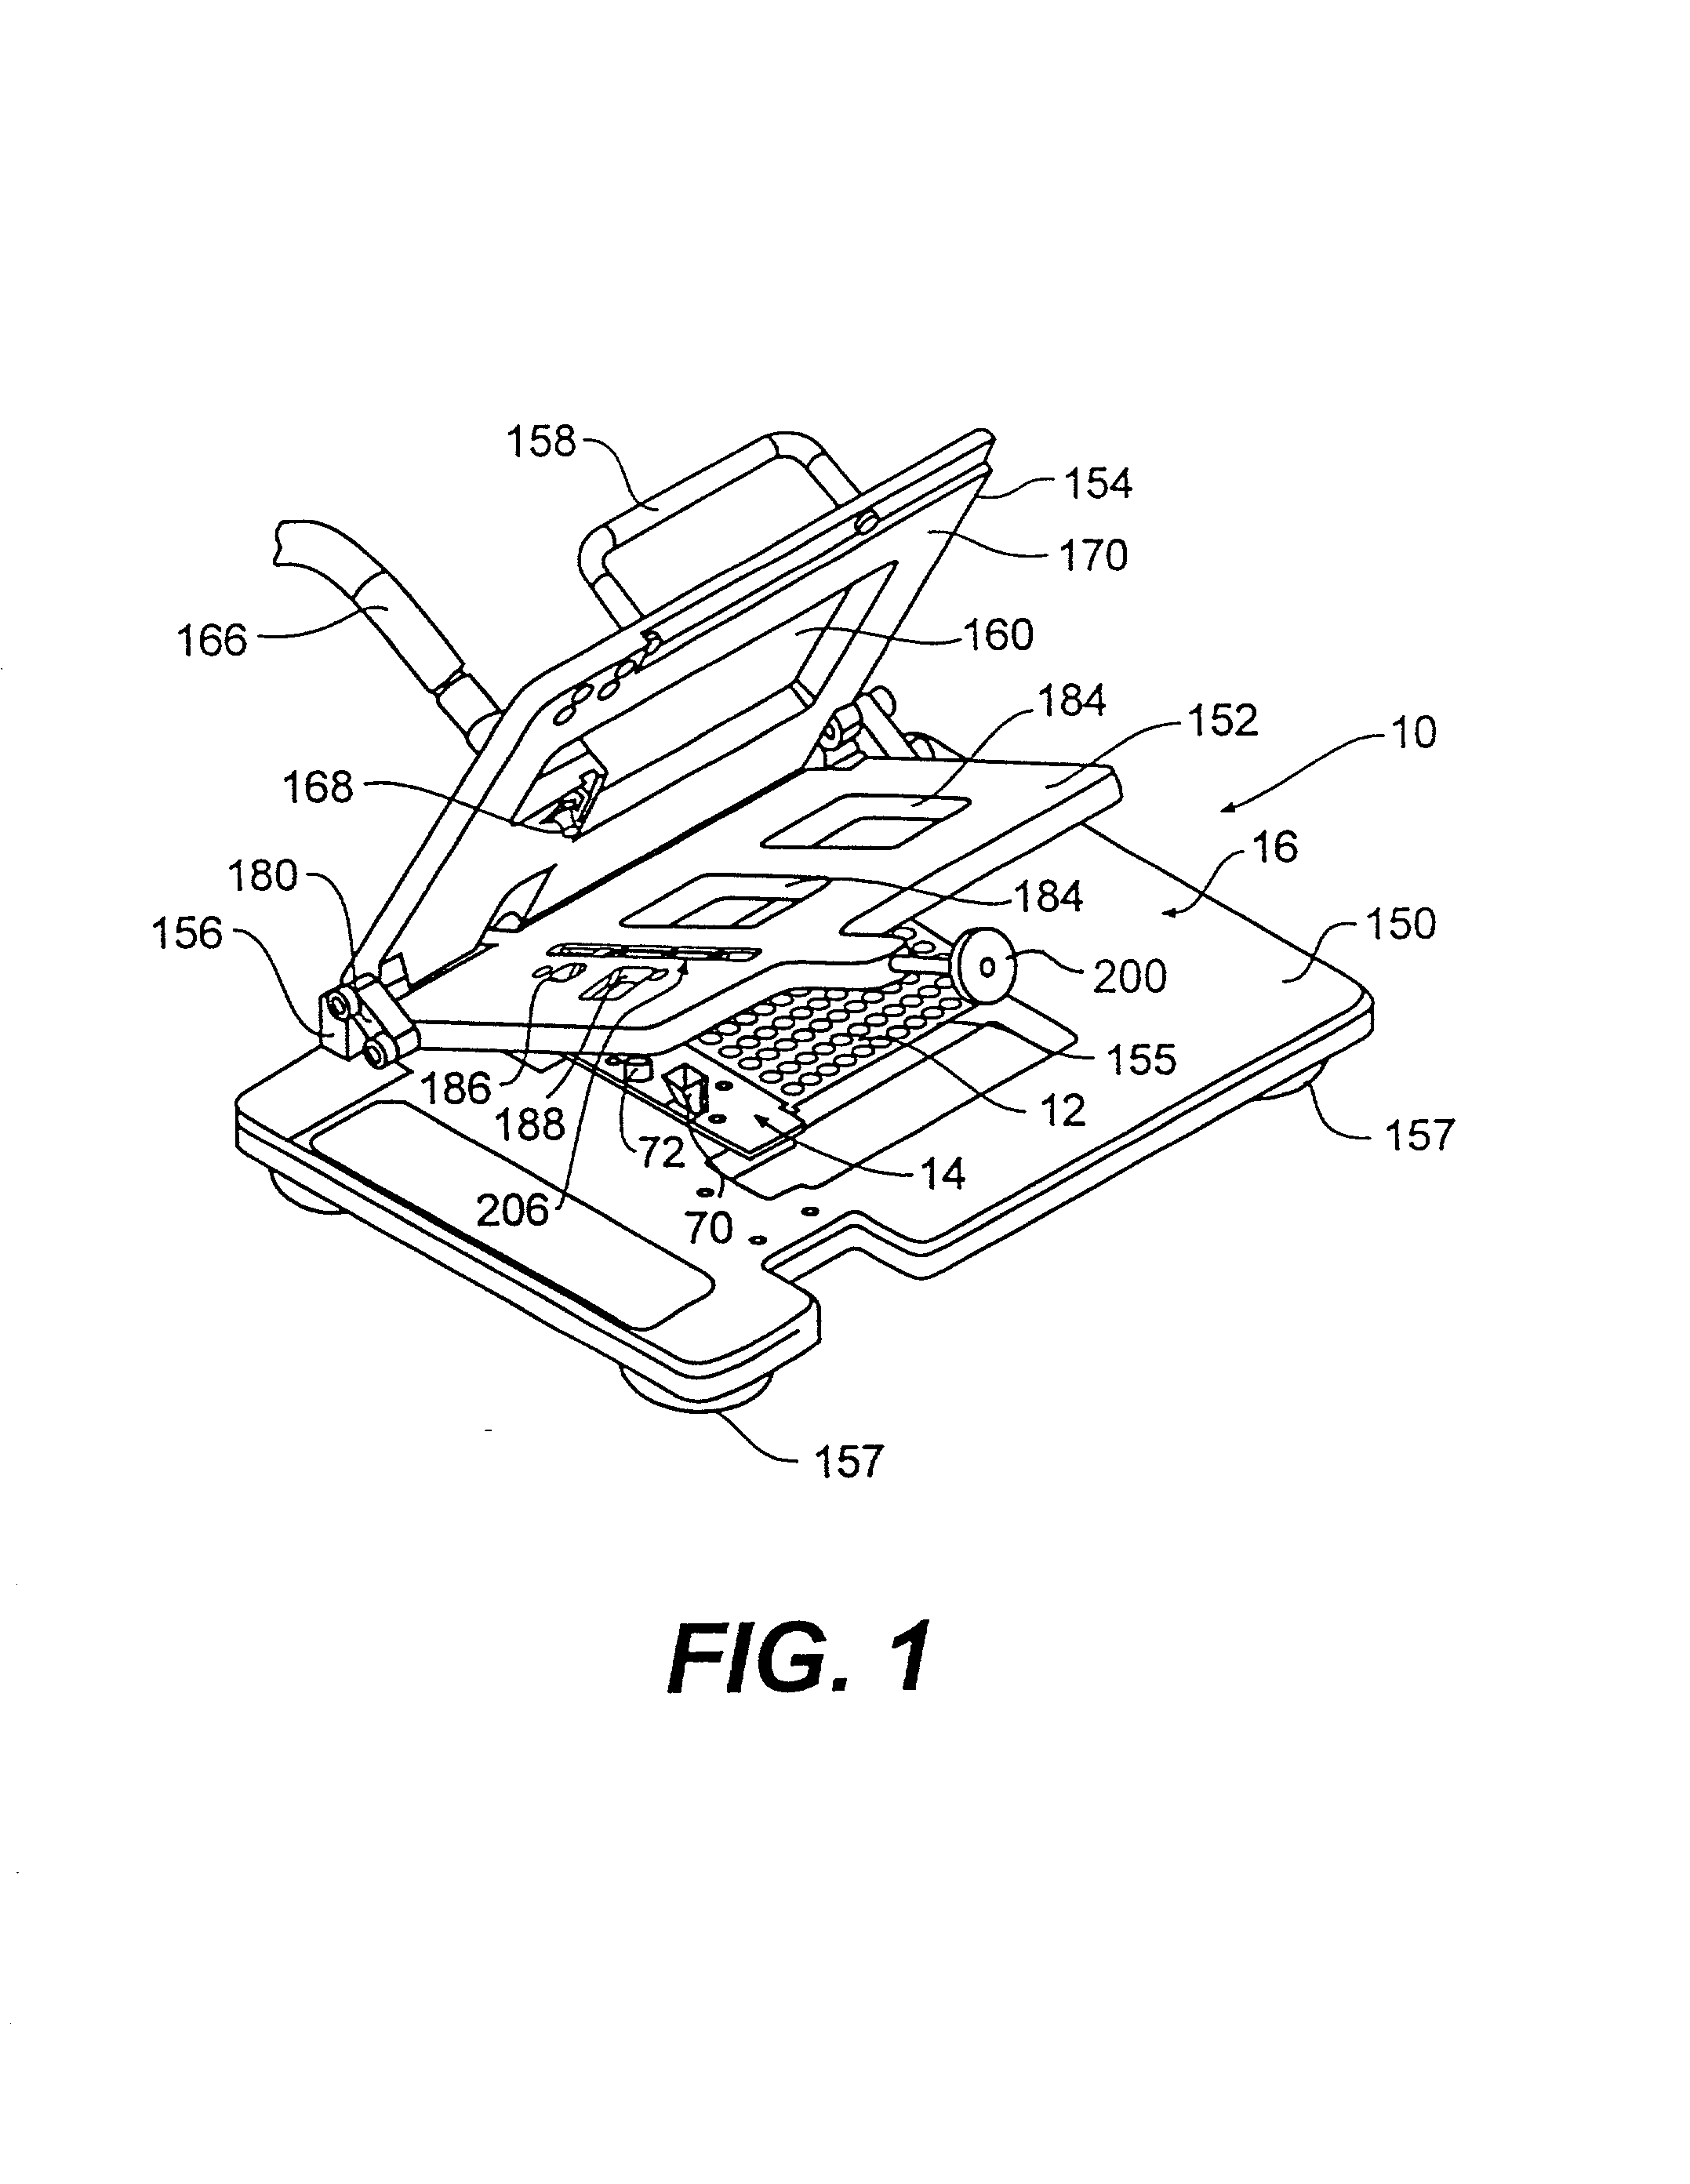 System and method for filling a substrate with a liquid sample